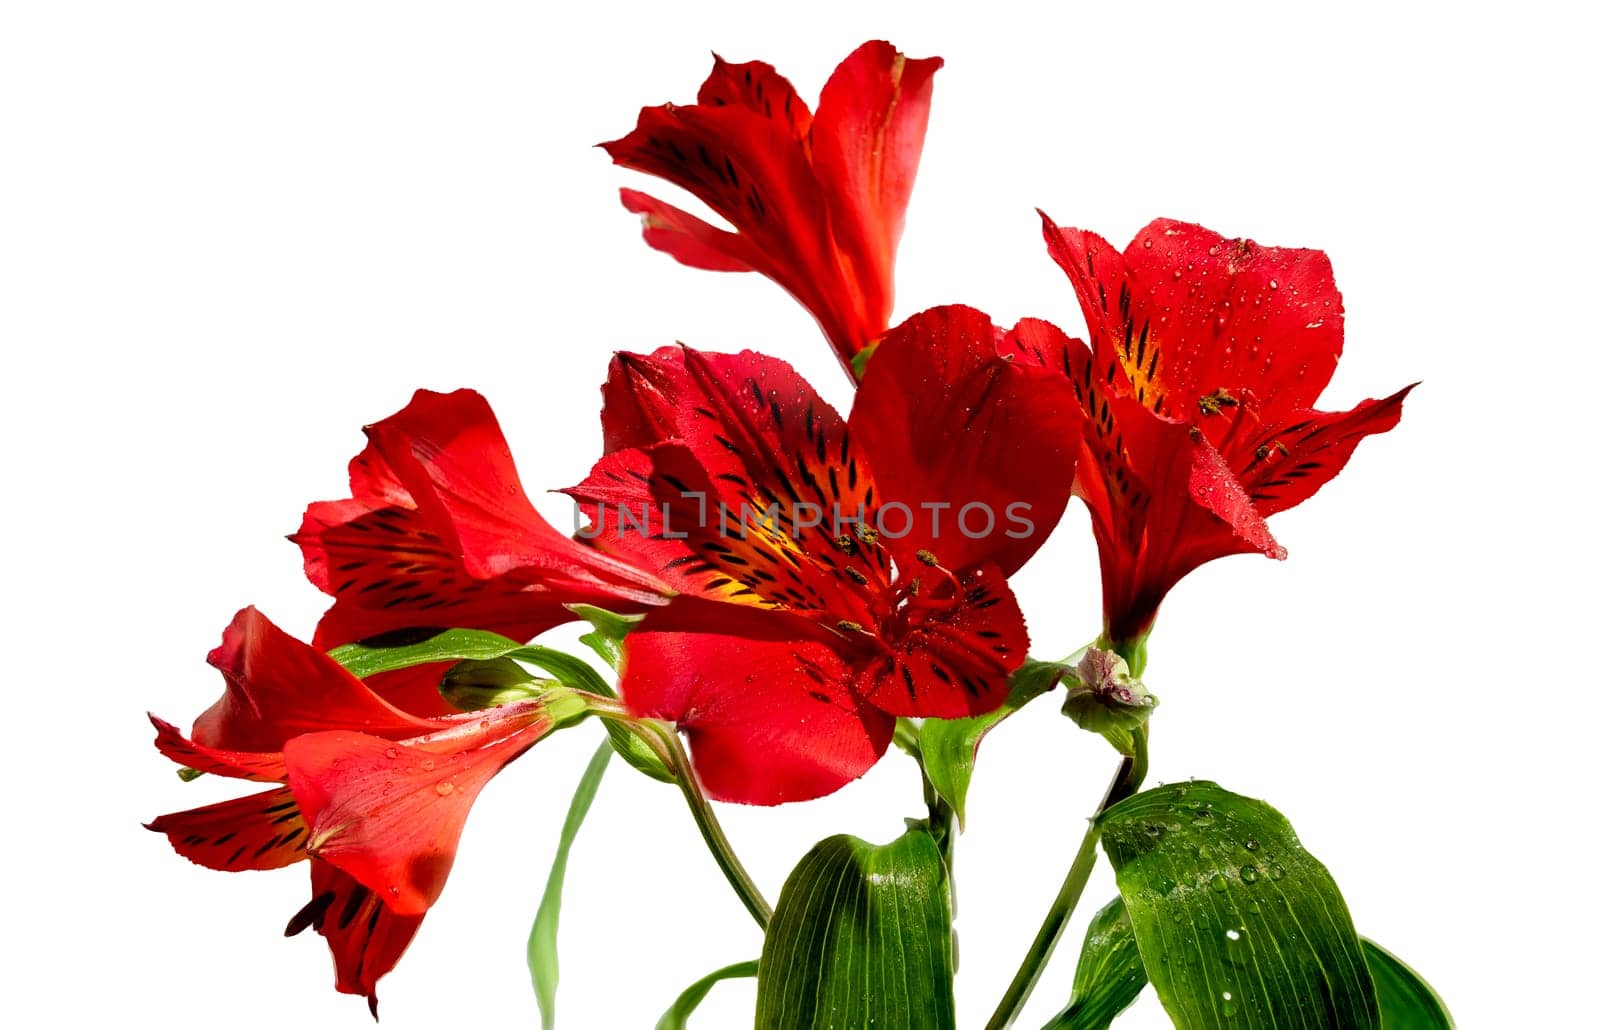 Red Alstroemeria flower on a white background by Multipedia